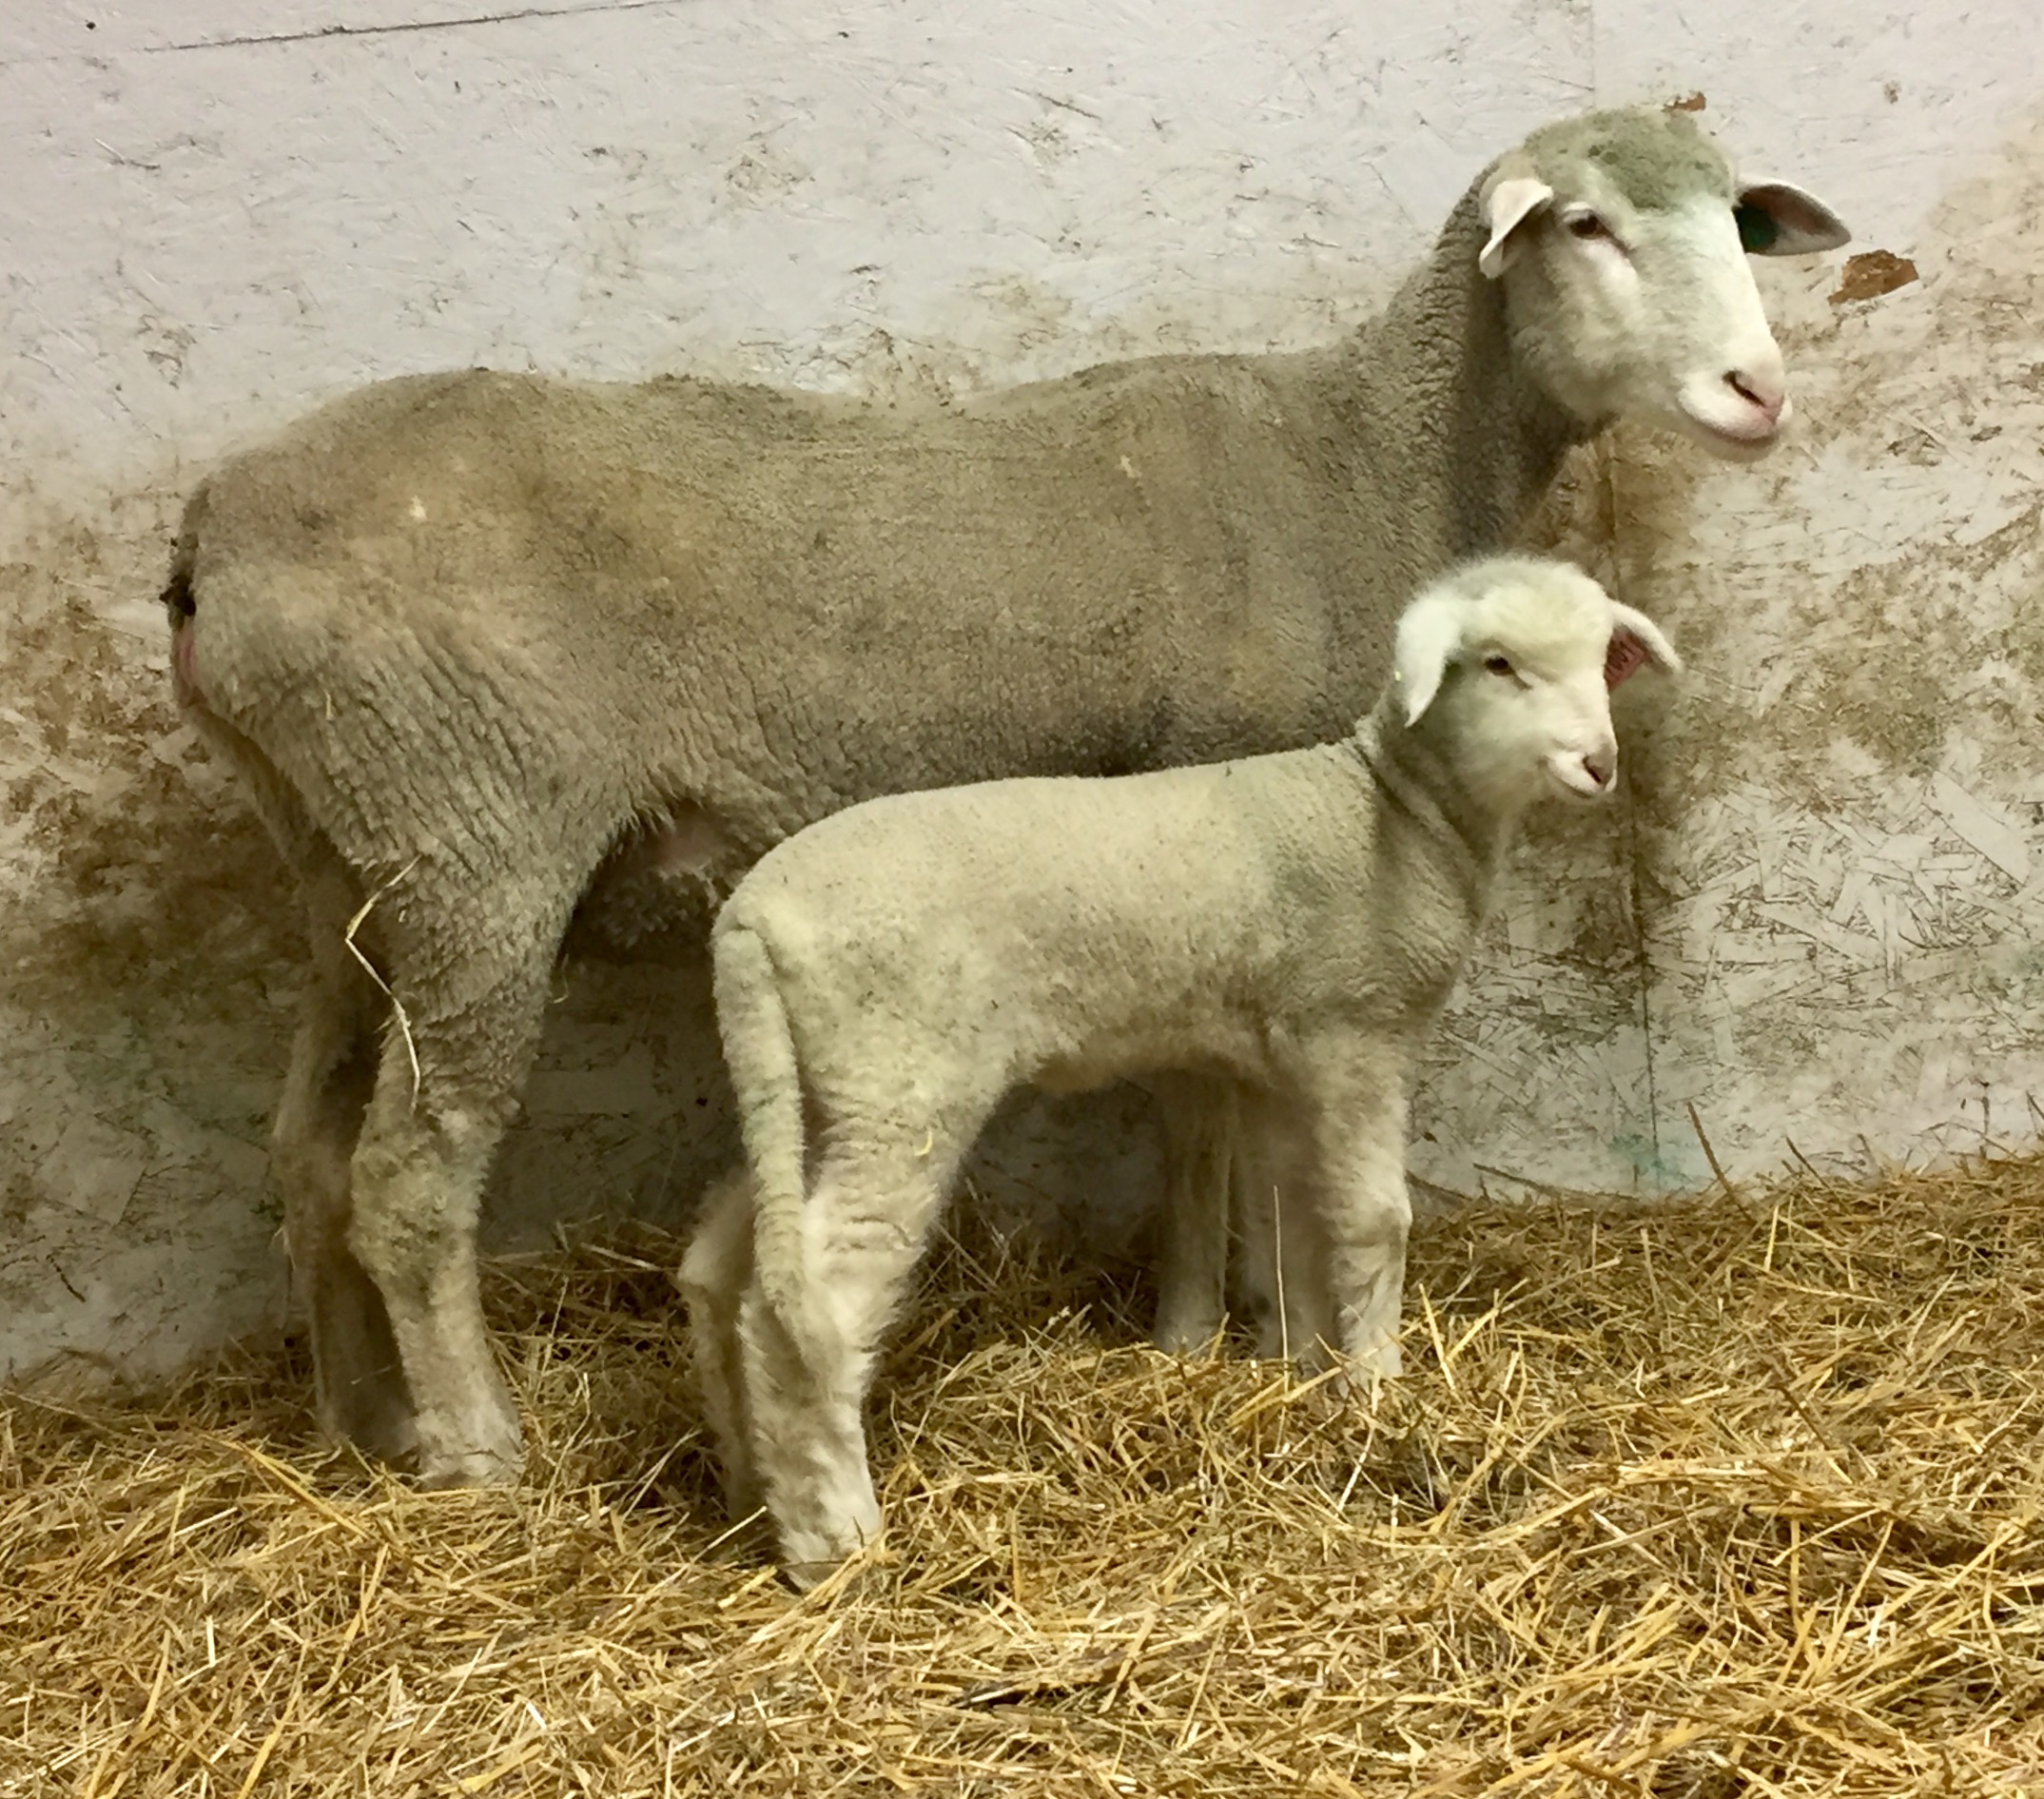 Ewe reproduction strategies will be one of the topics covered at the joint North Dakota and Minnesota Lamb and Wool Producers associations' conference, set for Dec. 1-2. (NDSU photo)